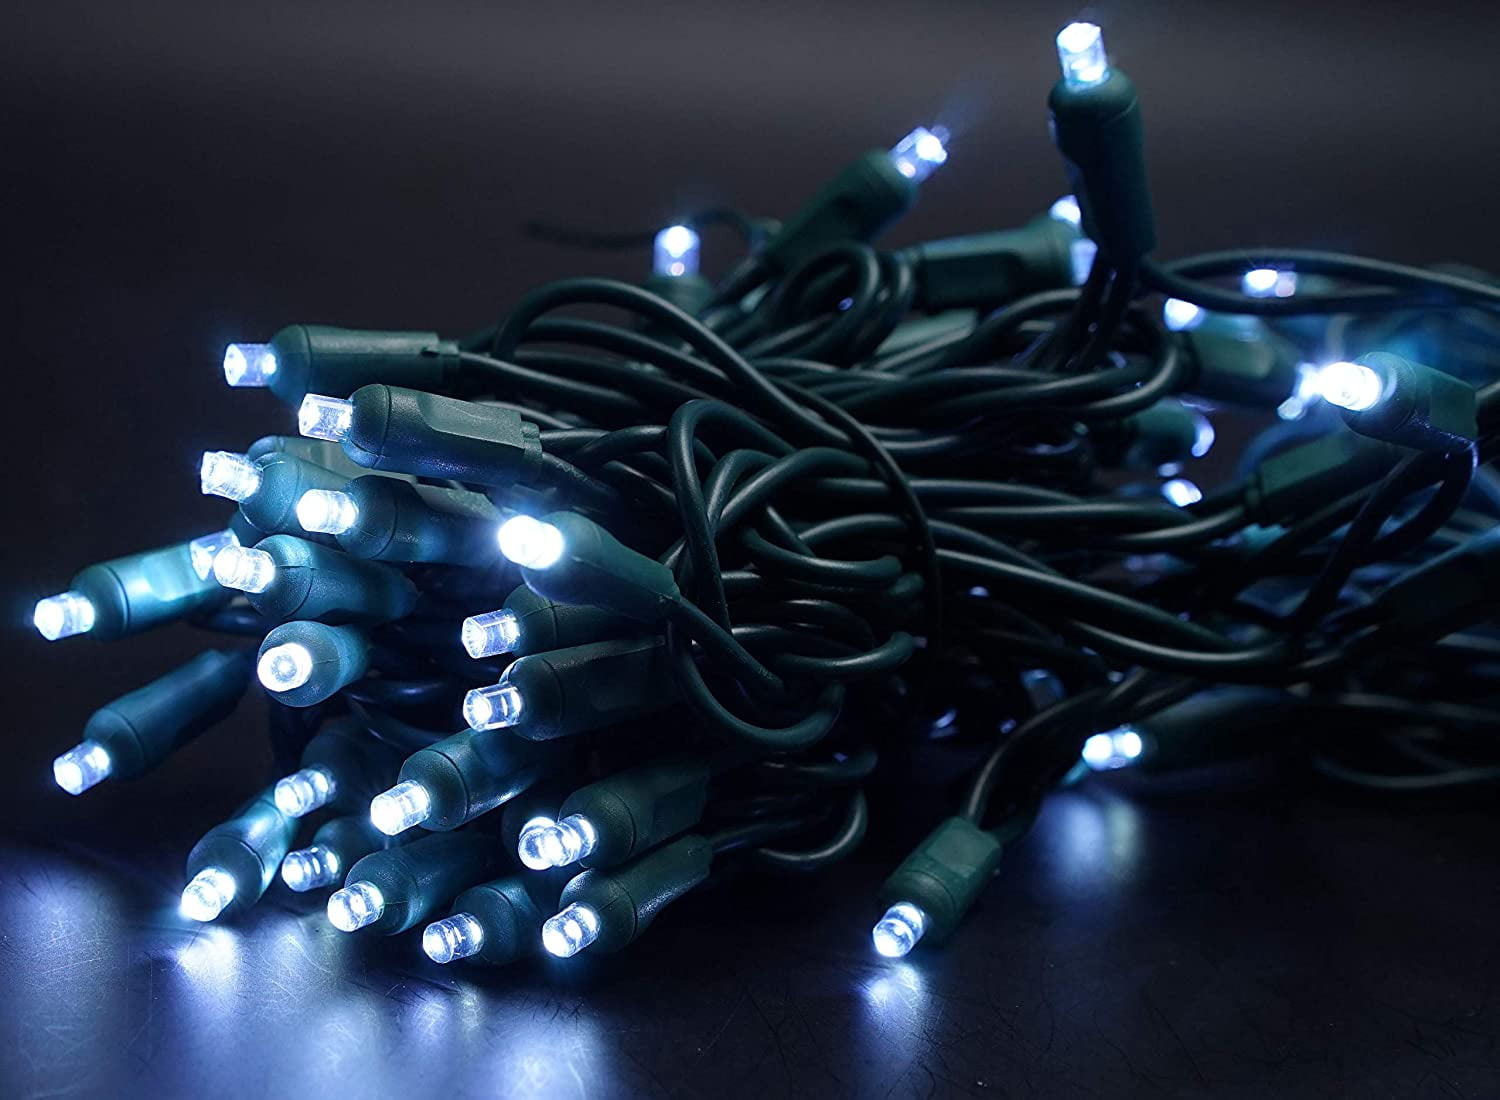 Warm White on green wire 50 count MINI LIGHTS LED Christmas 13 ft NEW many avail 